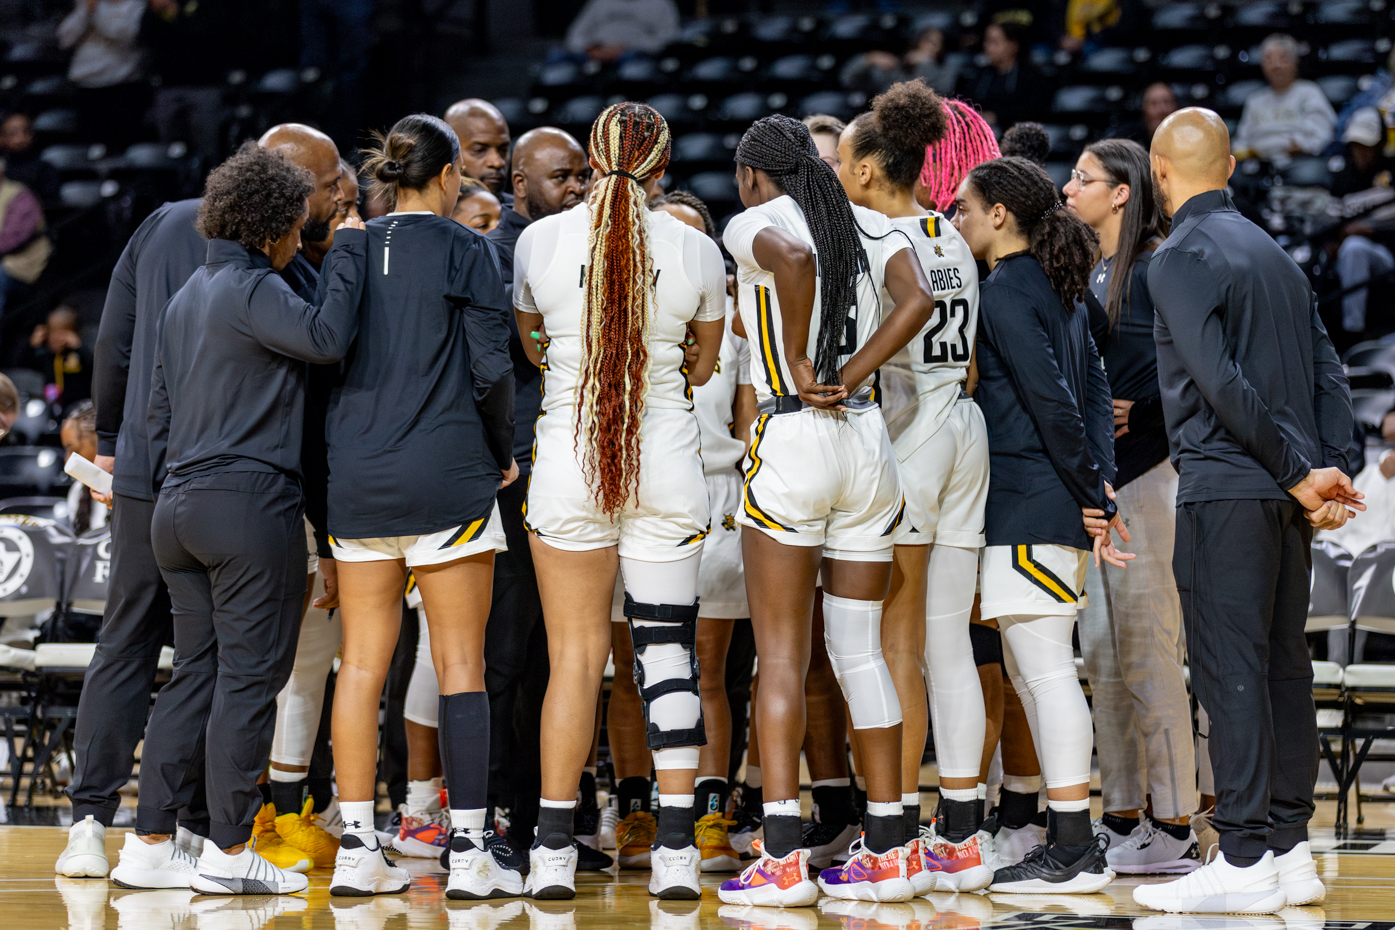 The Wichita State womens basketball team huddles together before the start of their Wednesday night match against Missouri Southern State University on Nov. 1.